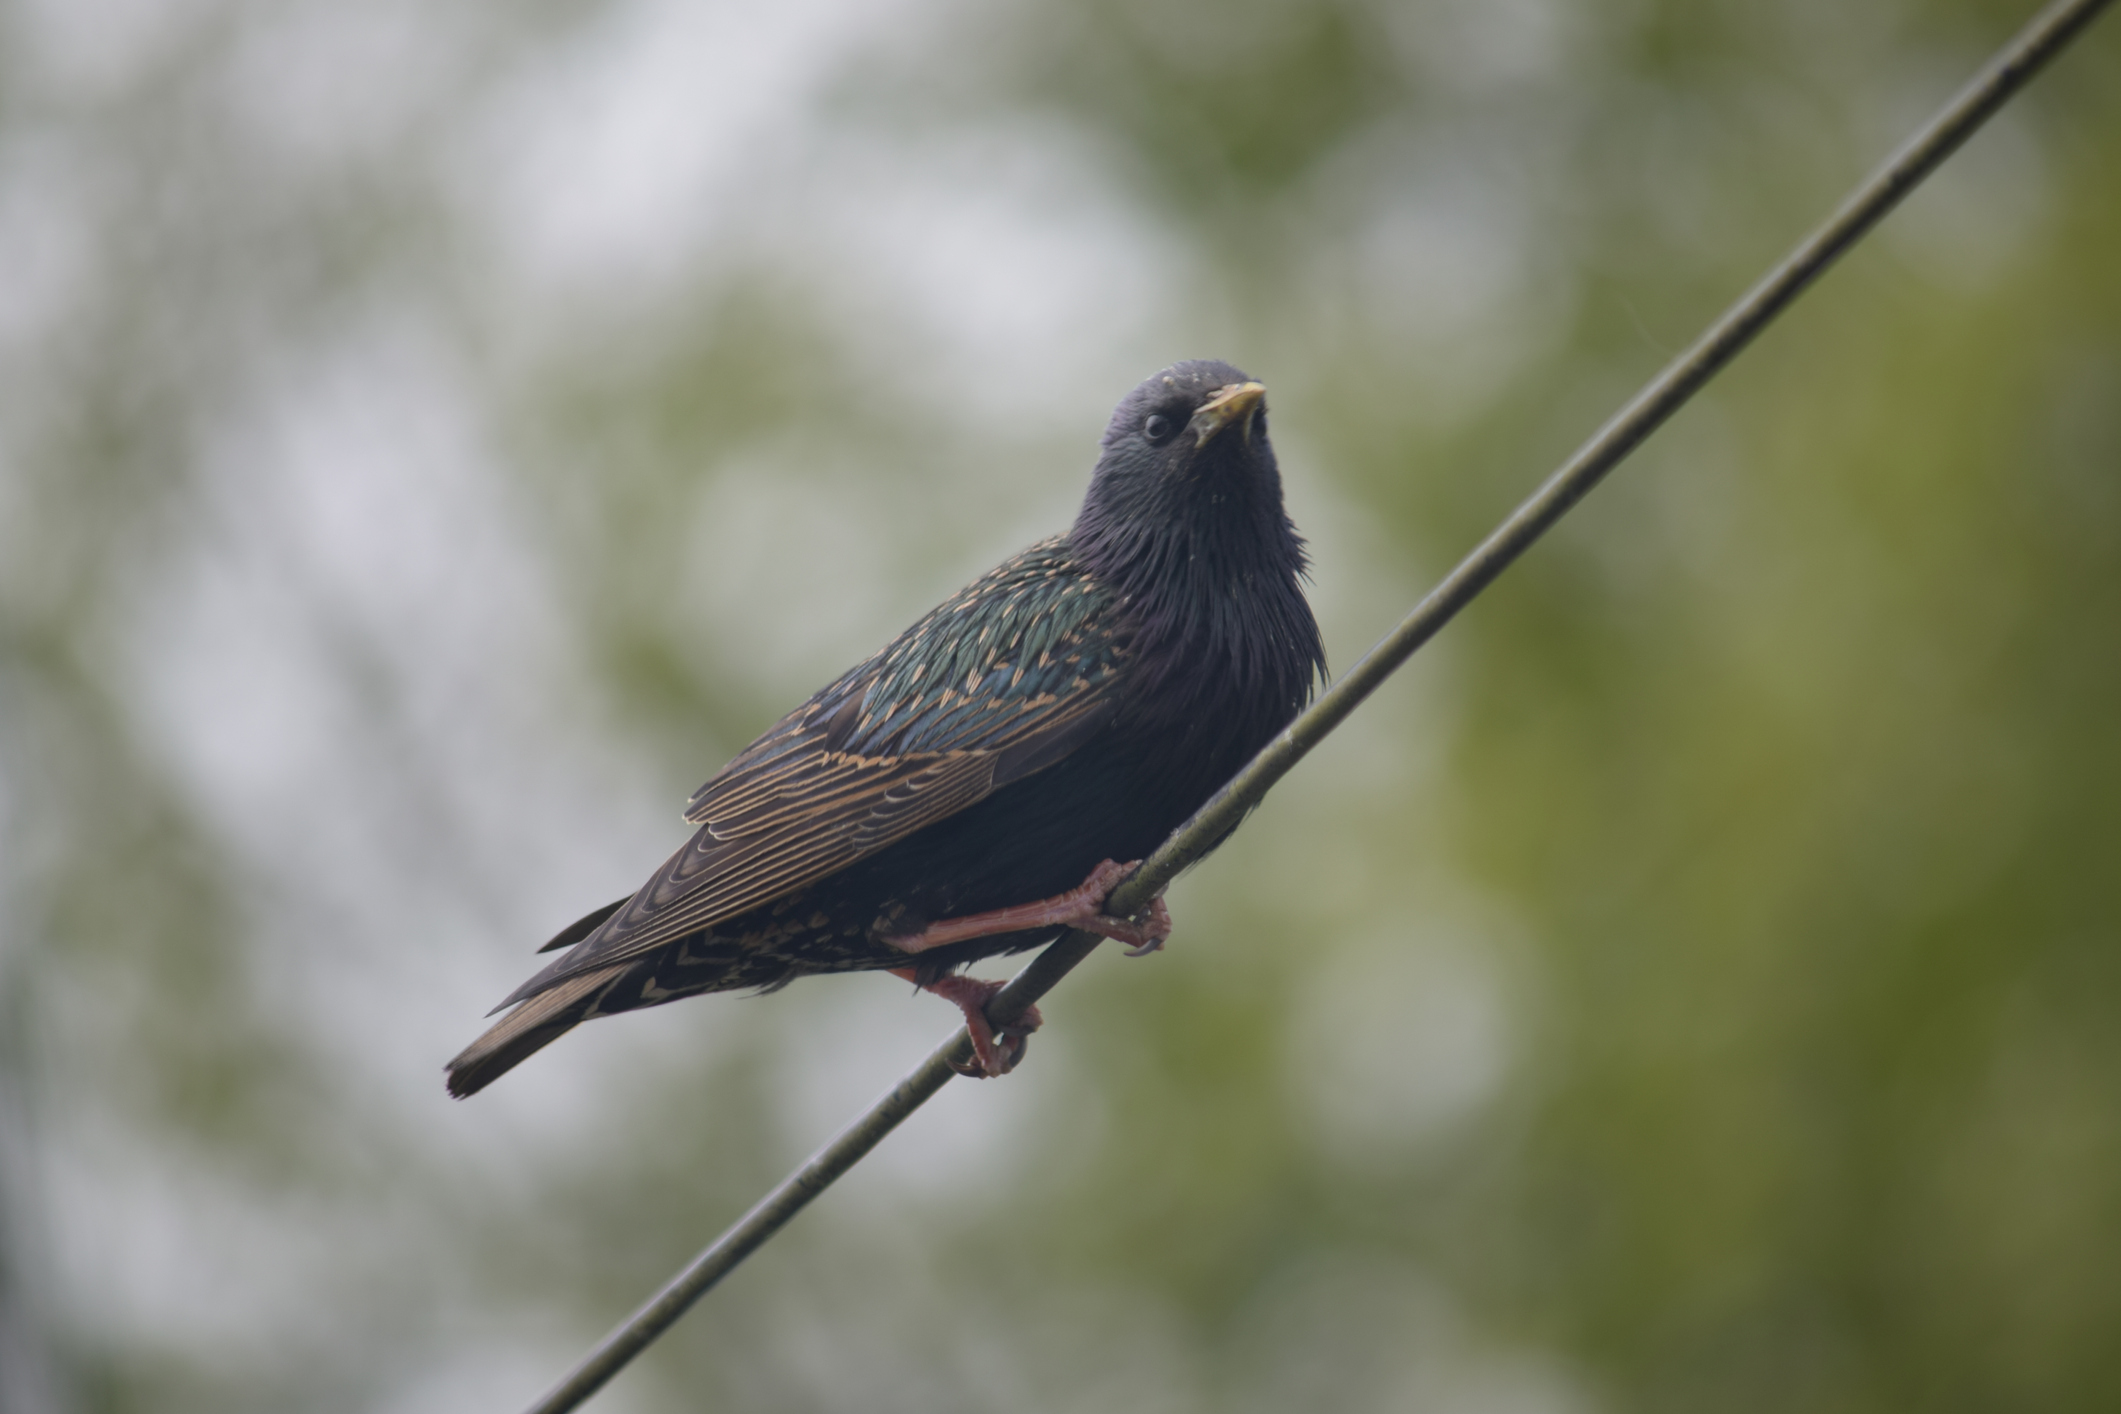 Species that form big flocks and are associated with livestock, like this invasive European starling, carry greater risks of foodborne pathogens. (Getty)